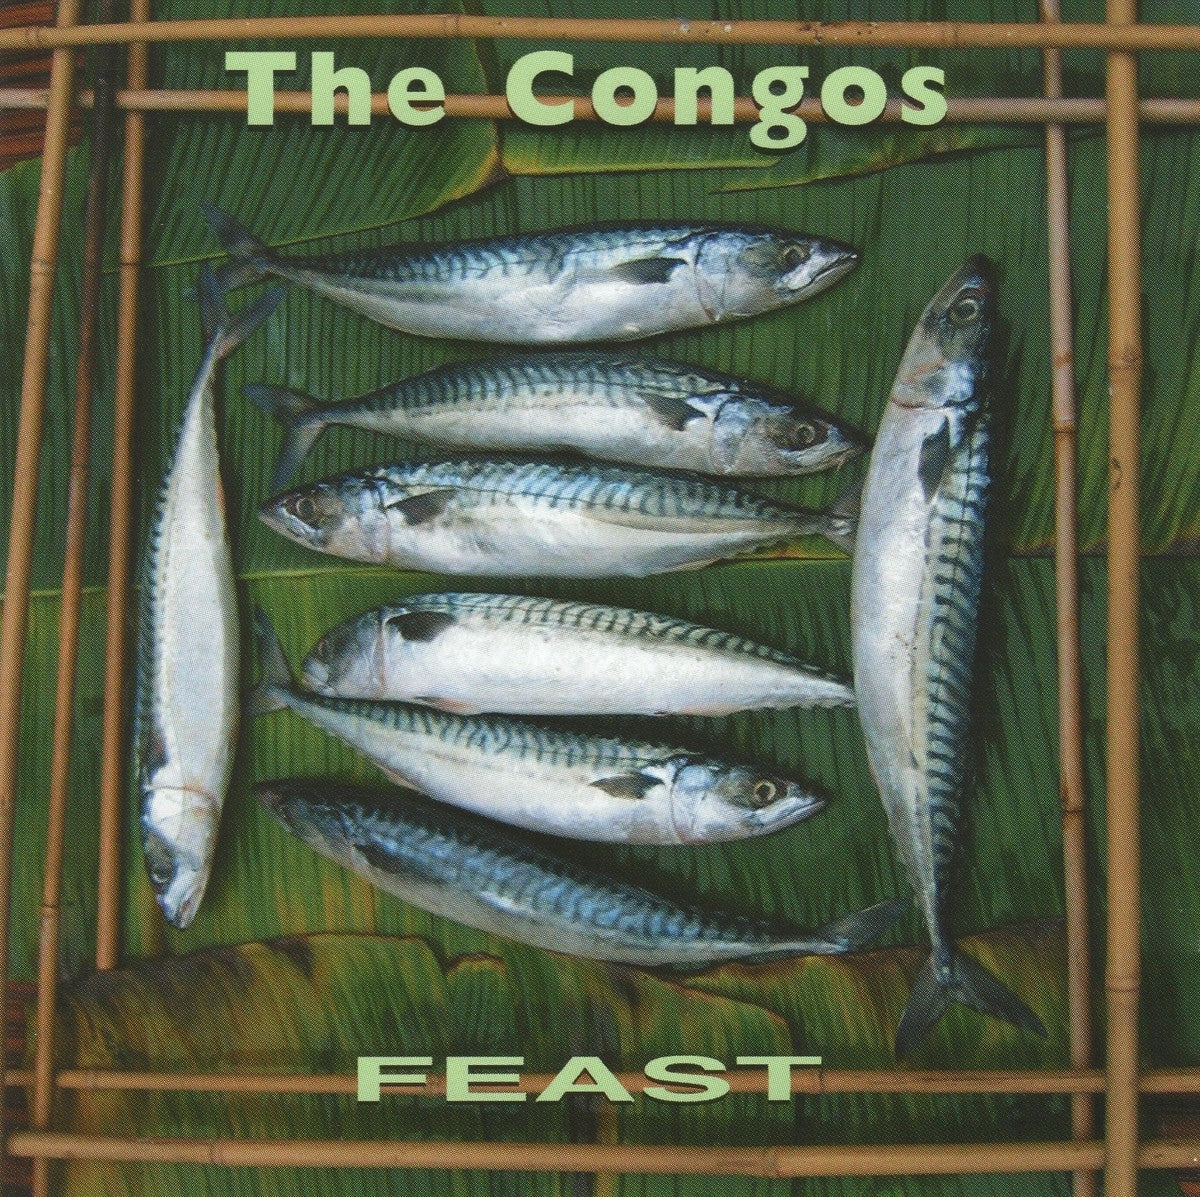  The Congos – Feast | Buy the Vinyl LP from Flying Nun Records